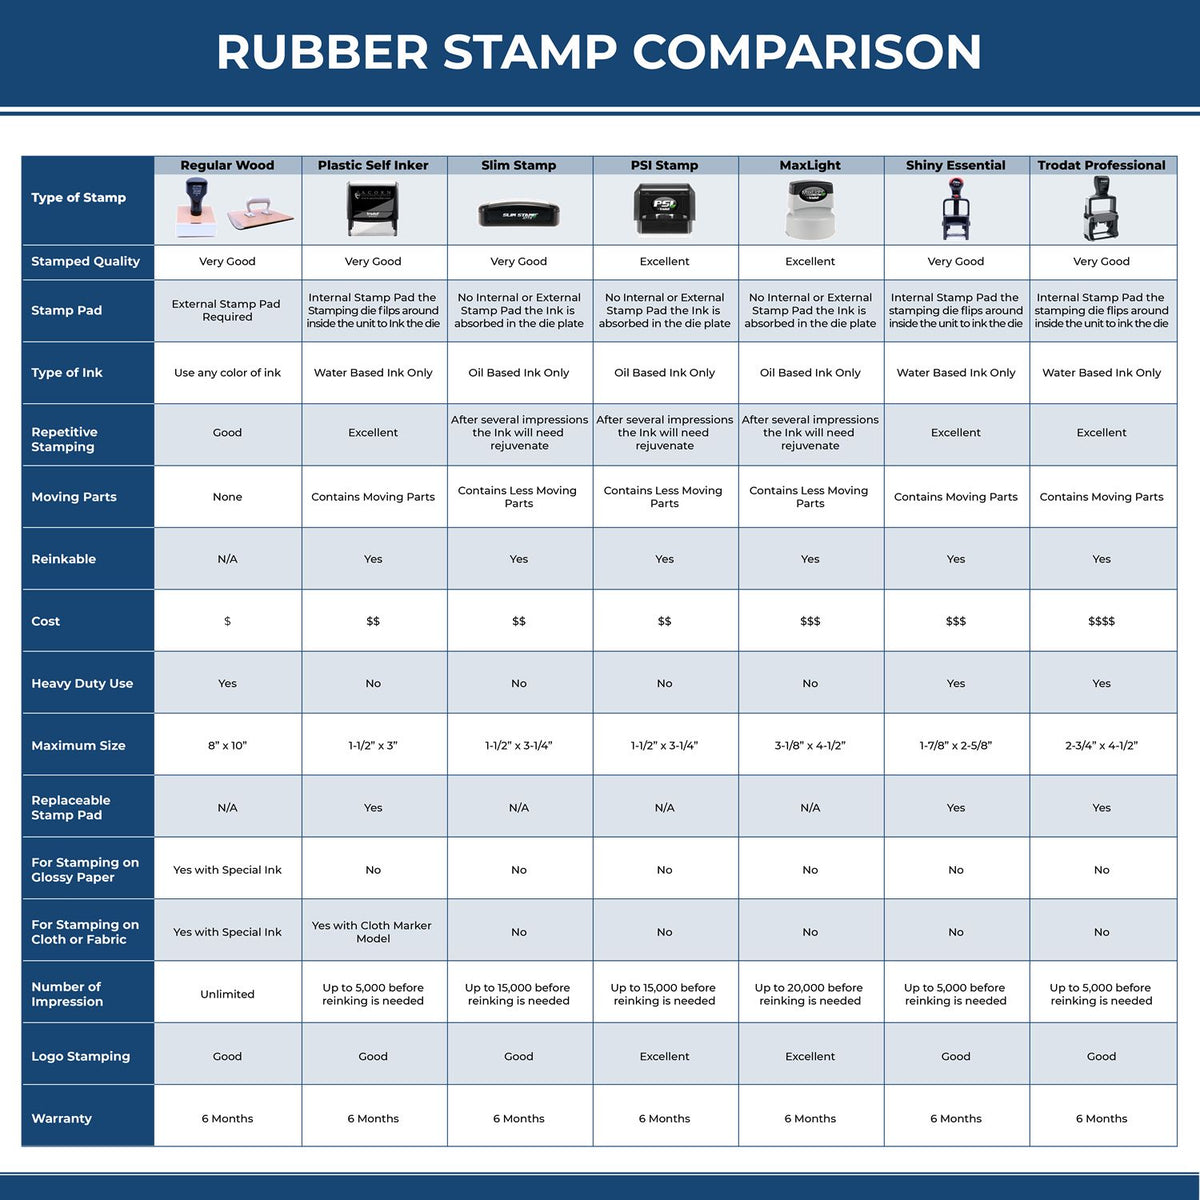 Large Self-Inking Bold Distributed Stamp 4880S Rubber Stamp Comparison